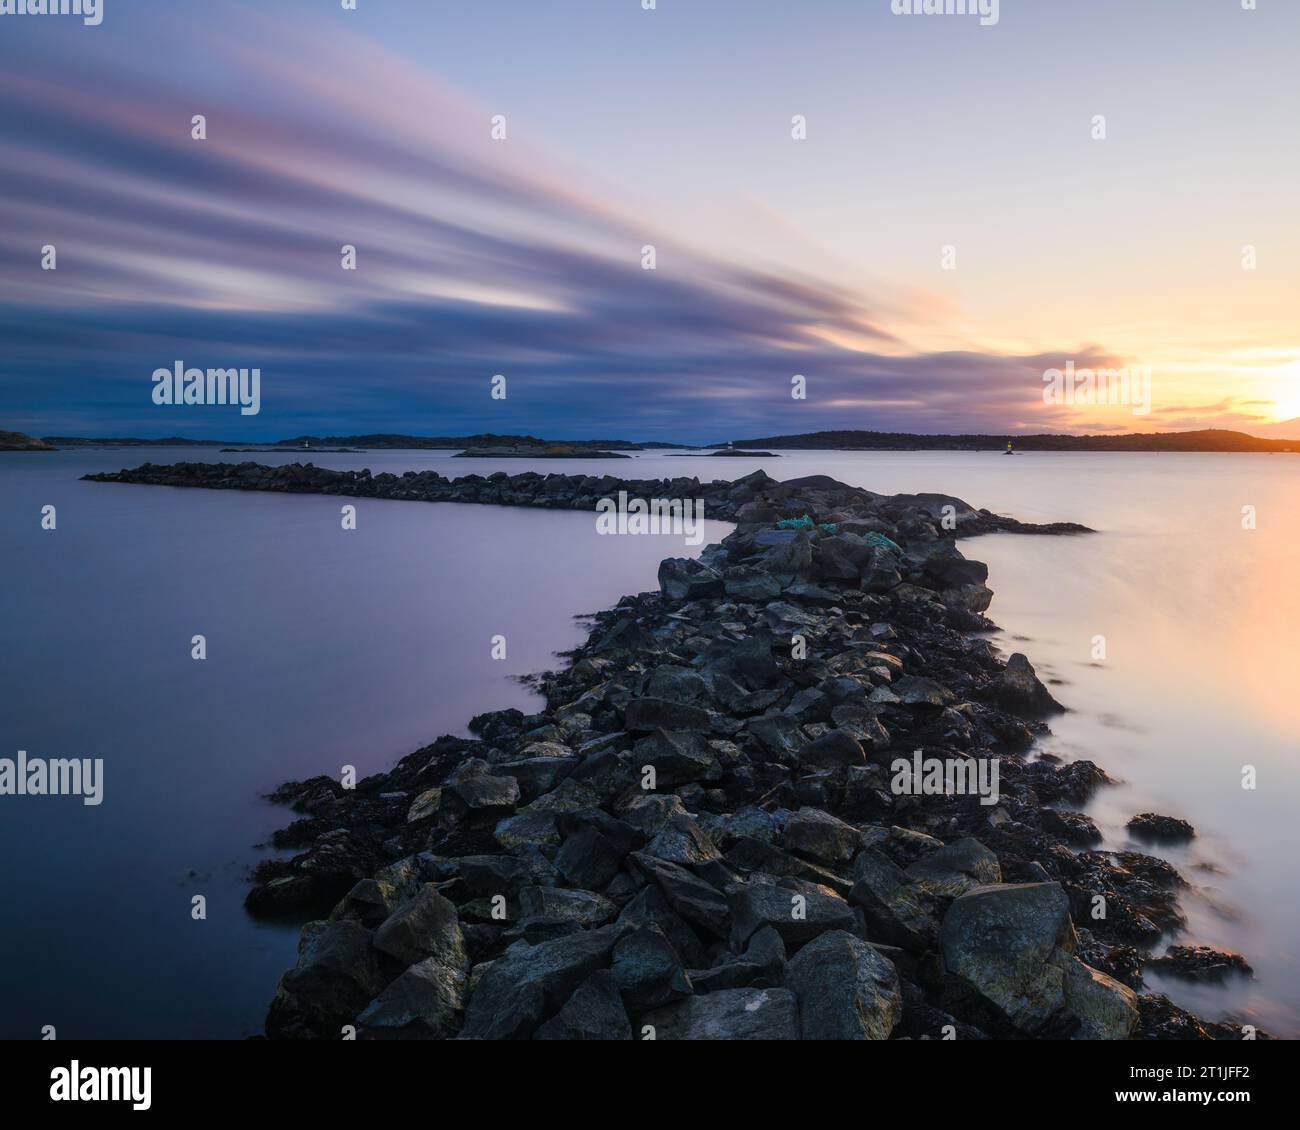 Tranquil sunset over Gothenburg's rocky shore and reflecting water. Stock Photo